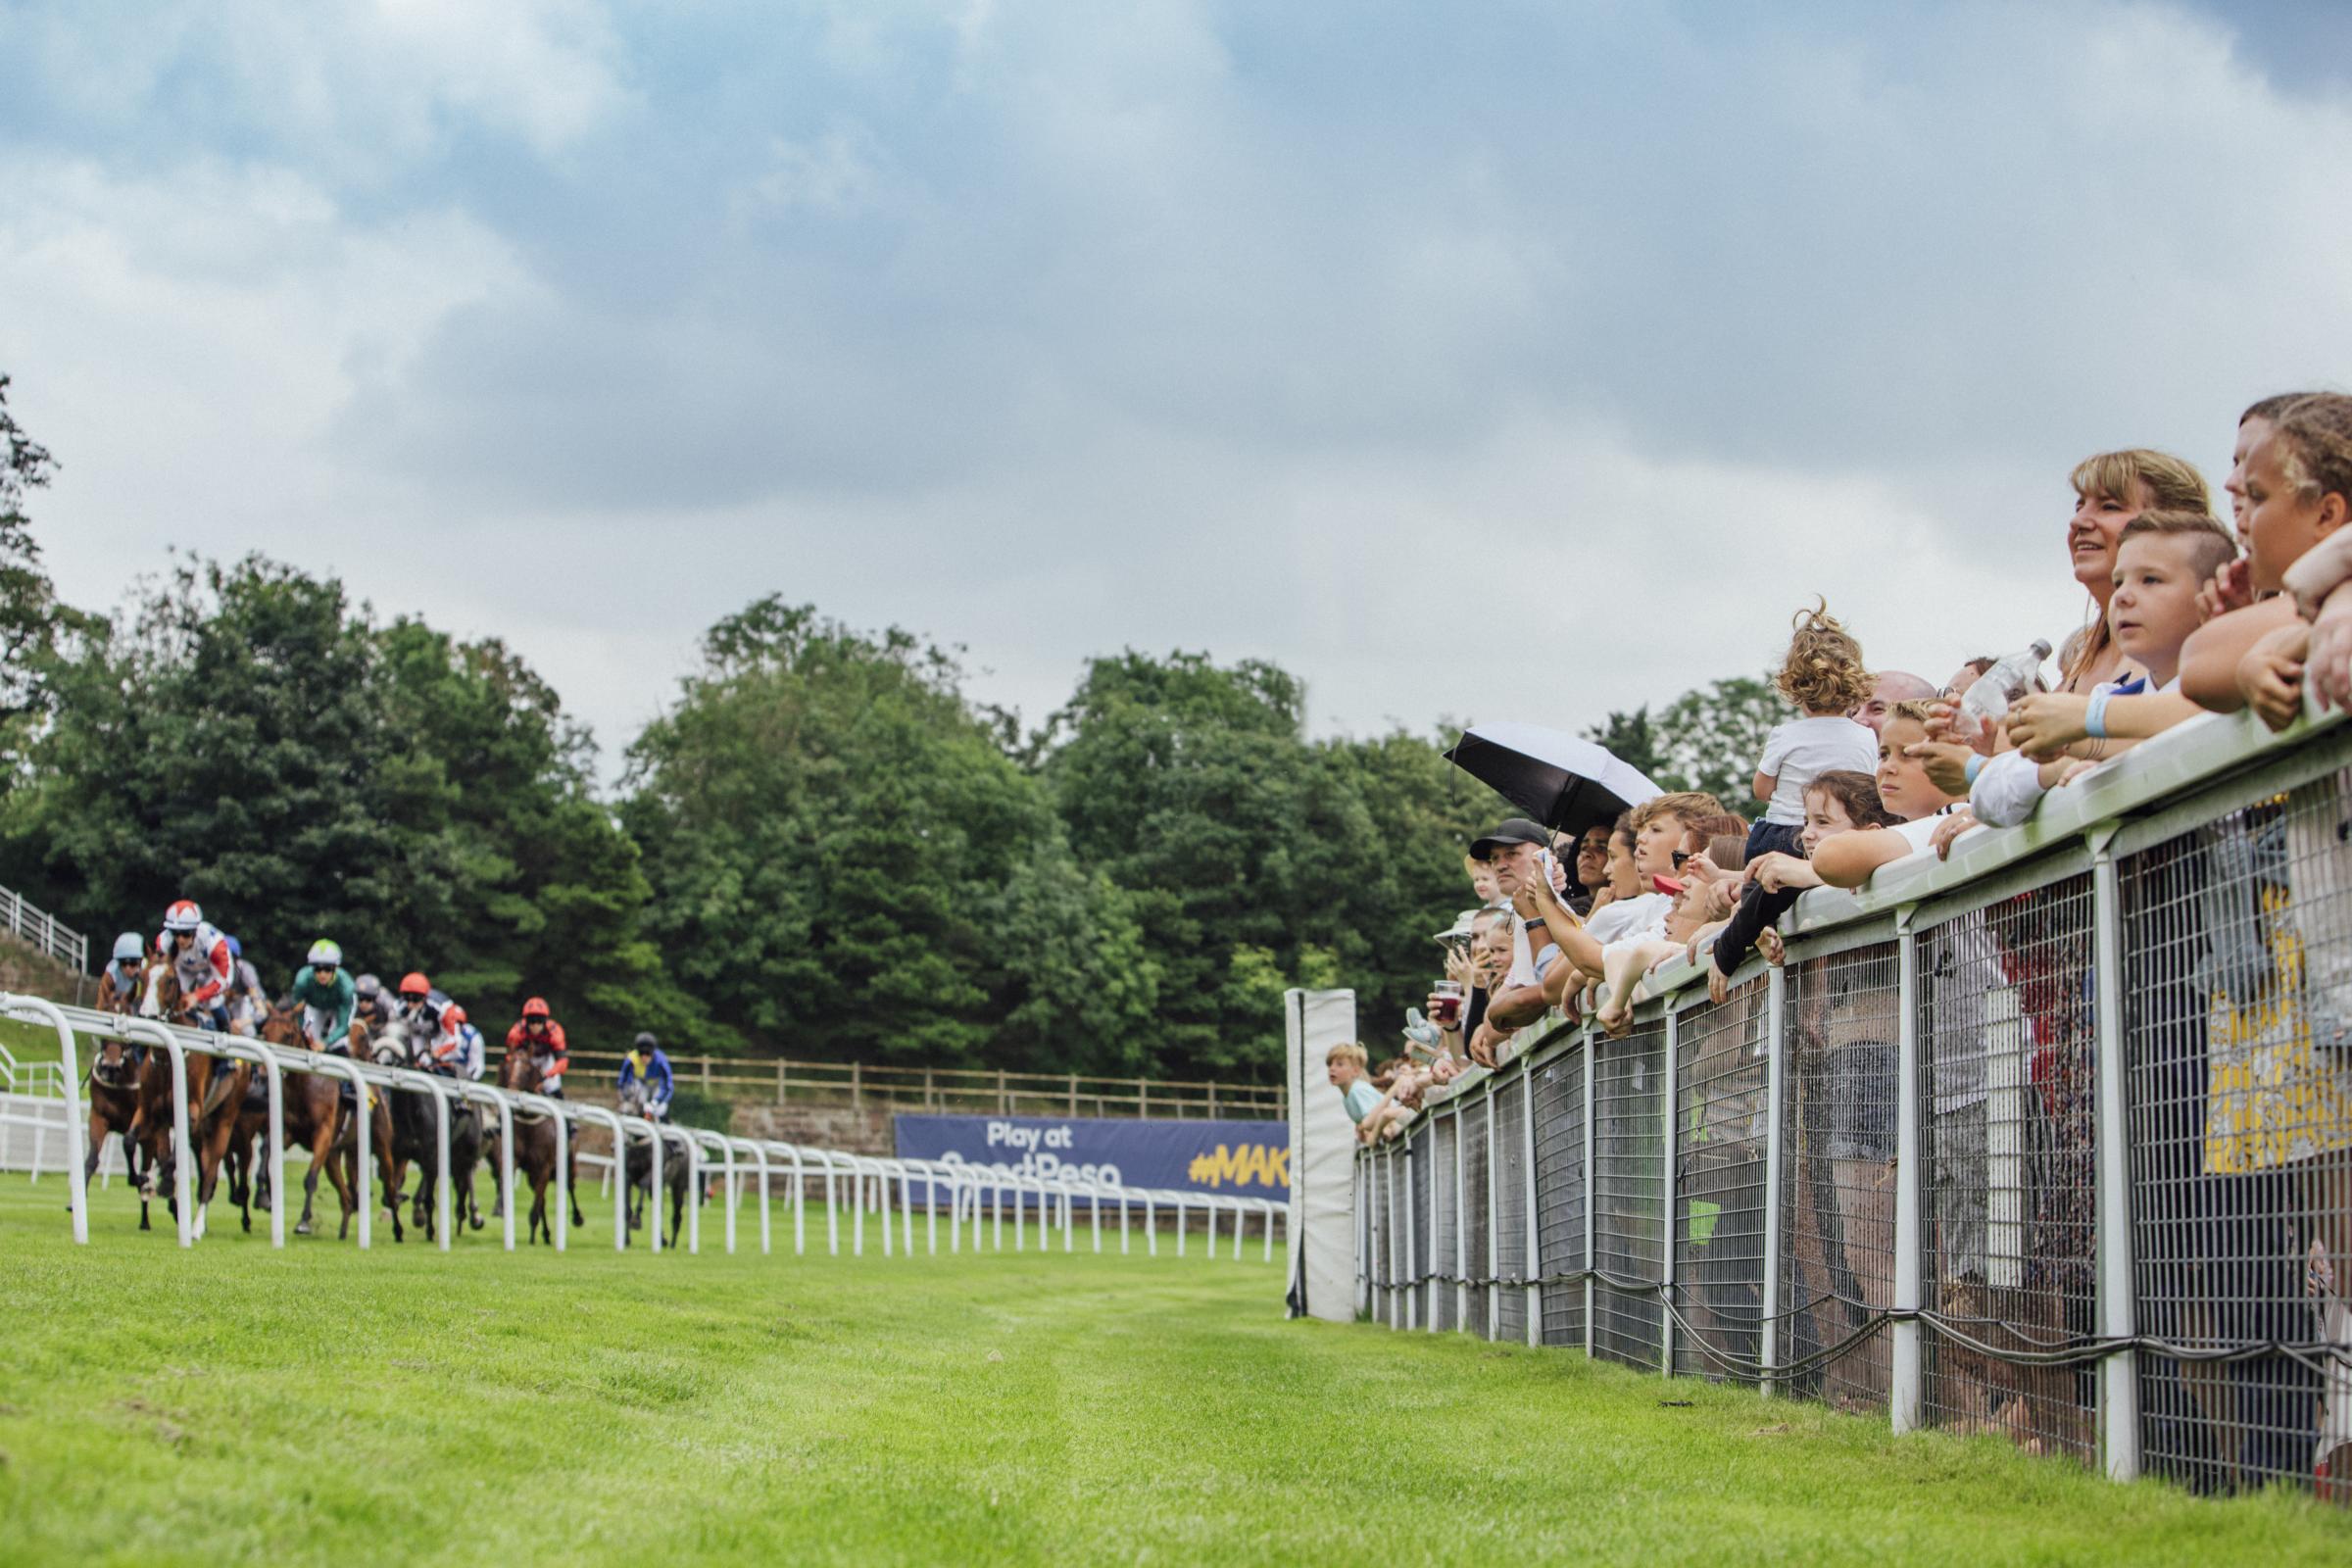 Chester Racecourse will be hosting its Family Funday.